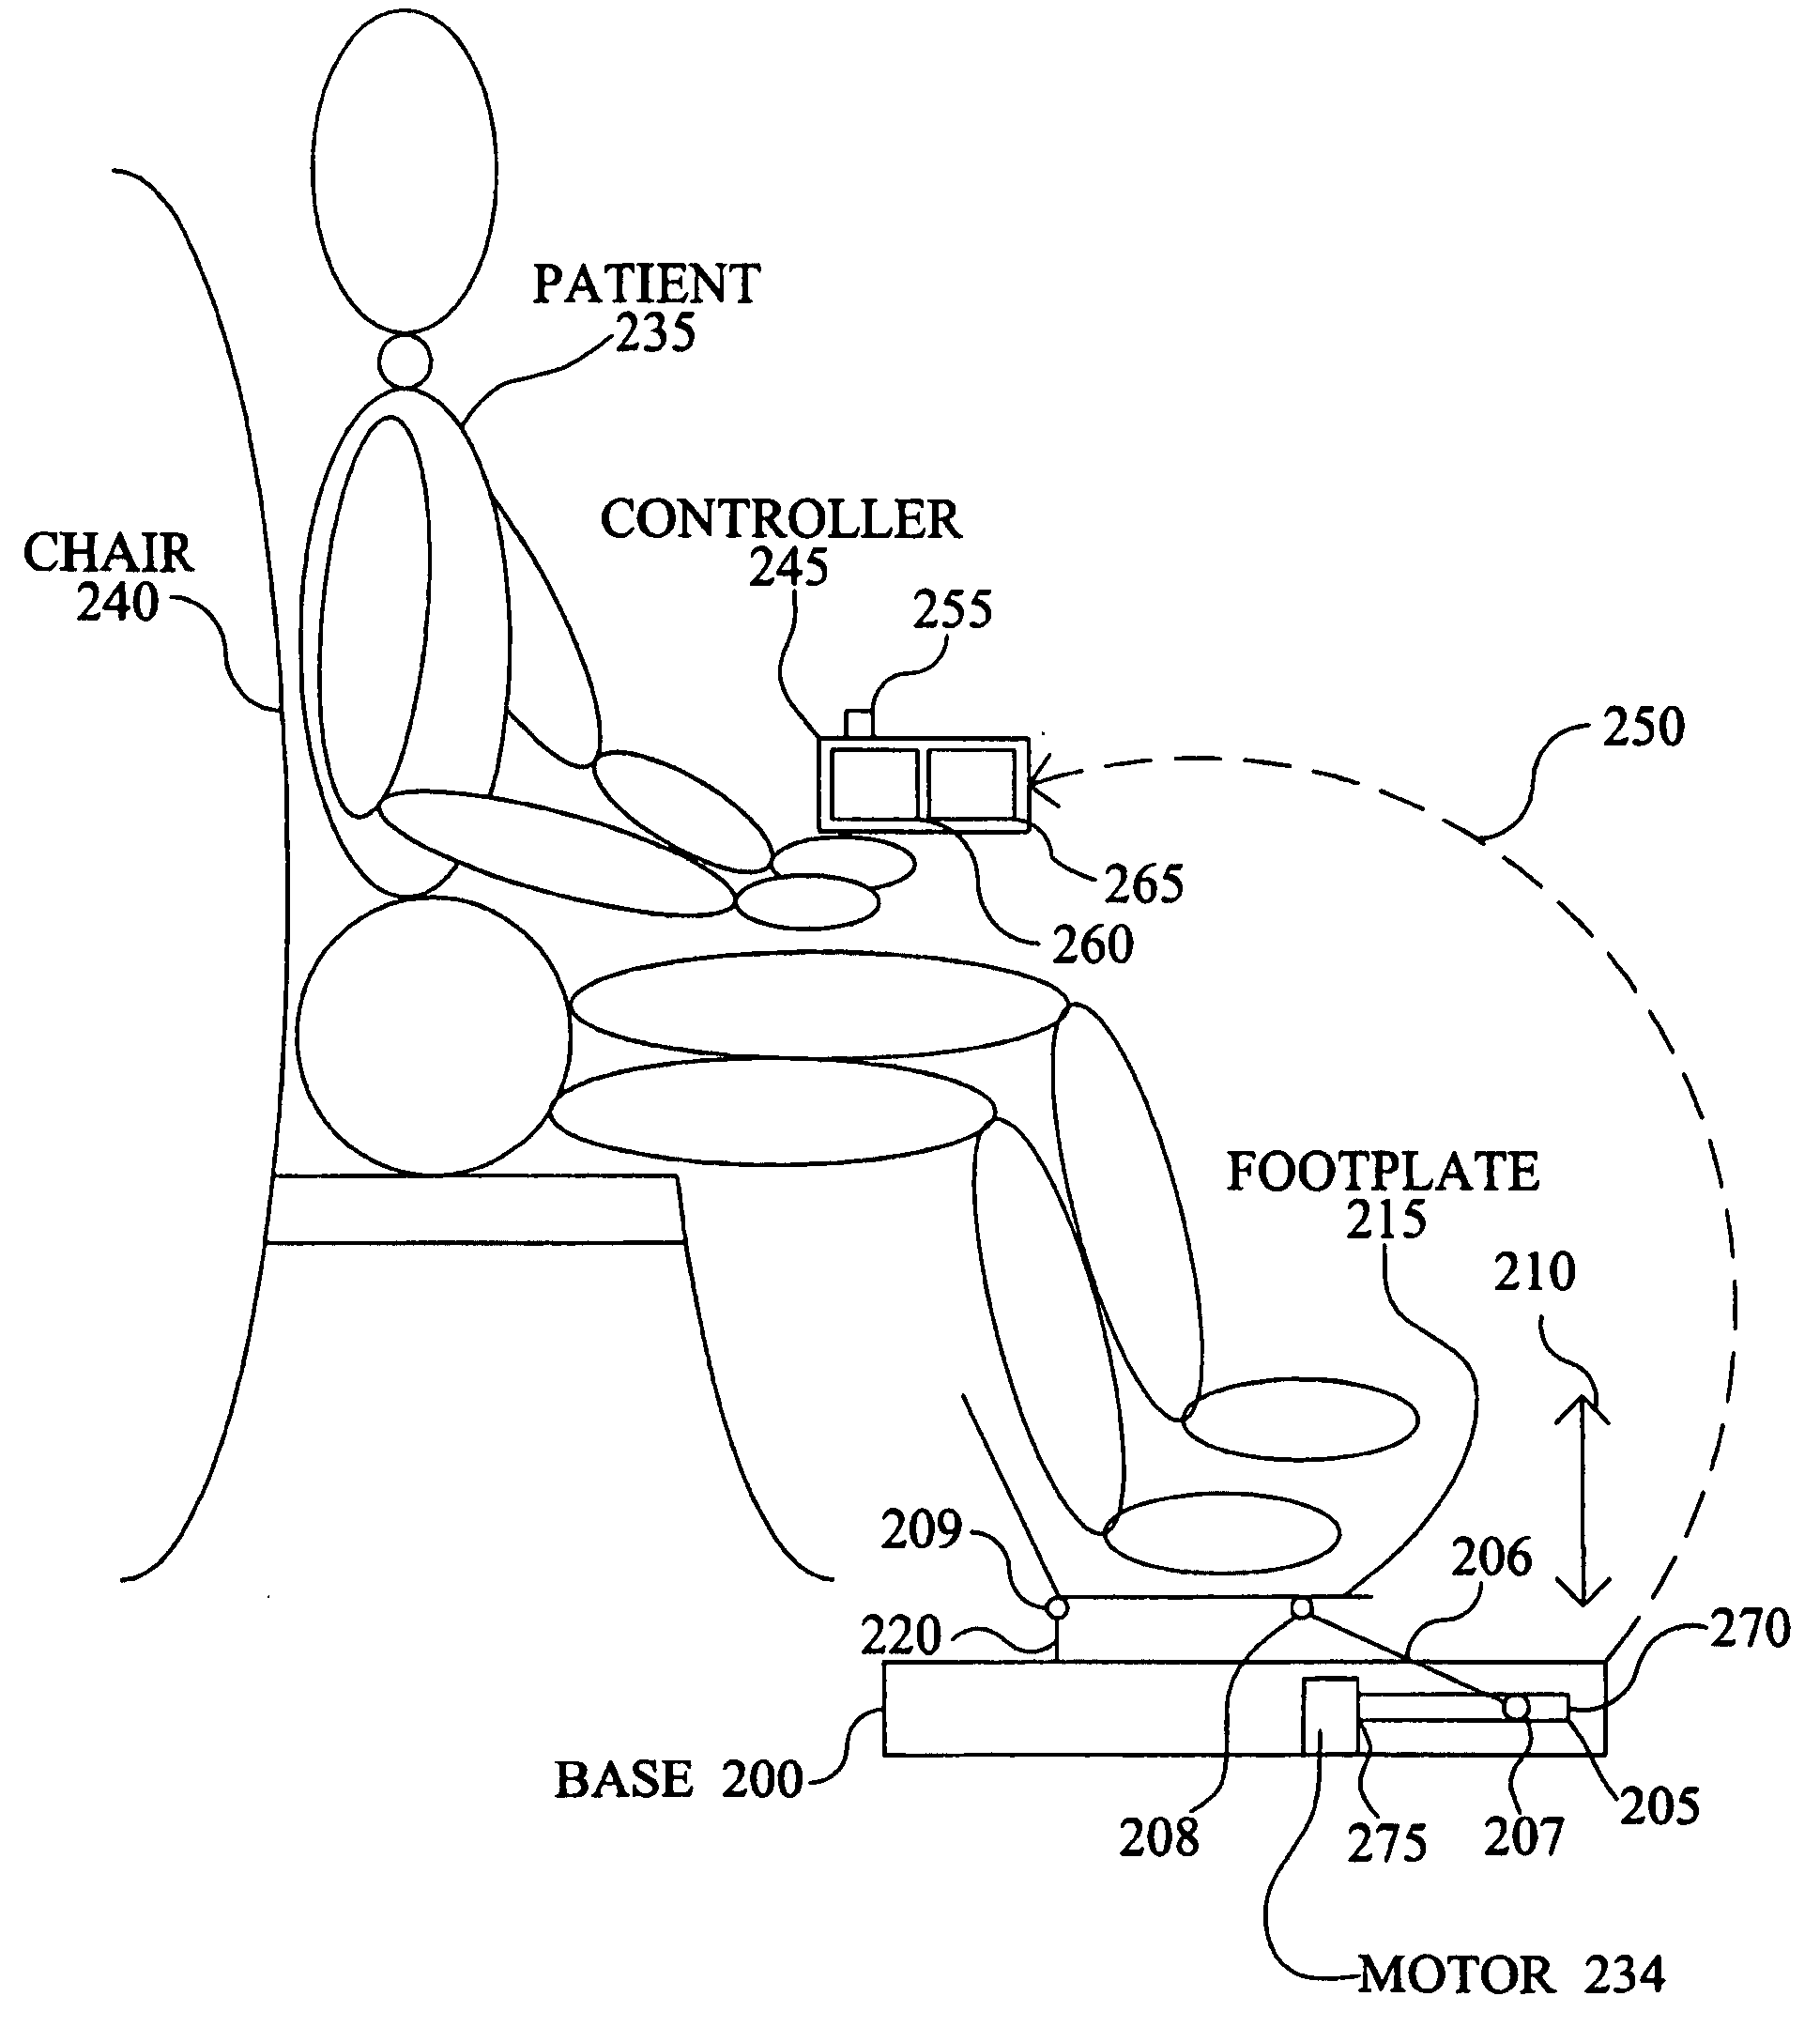 Continuous passive and active motion machine for the ankle